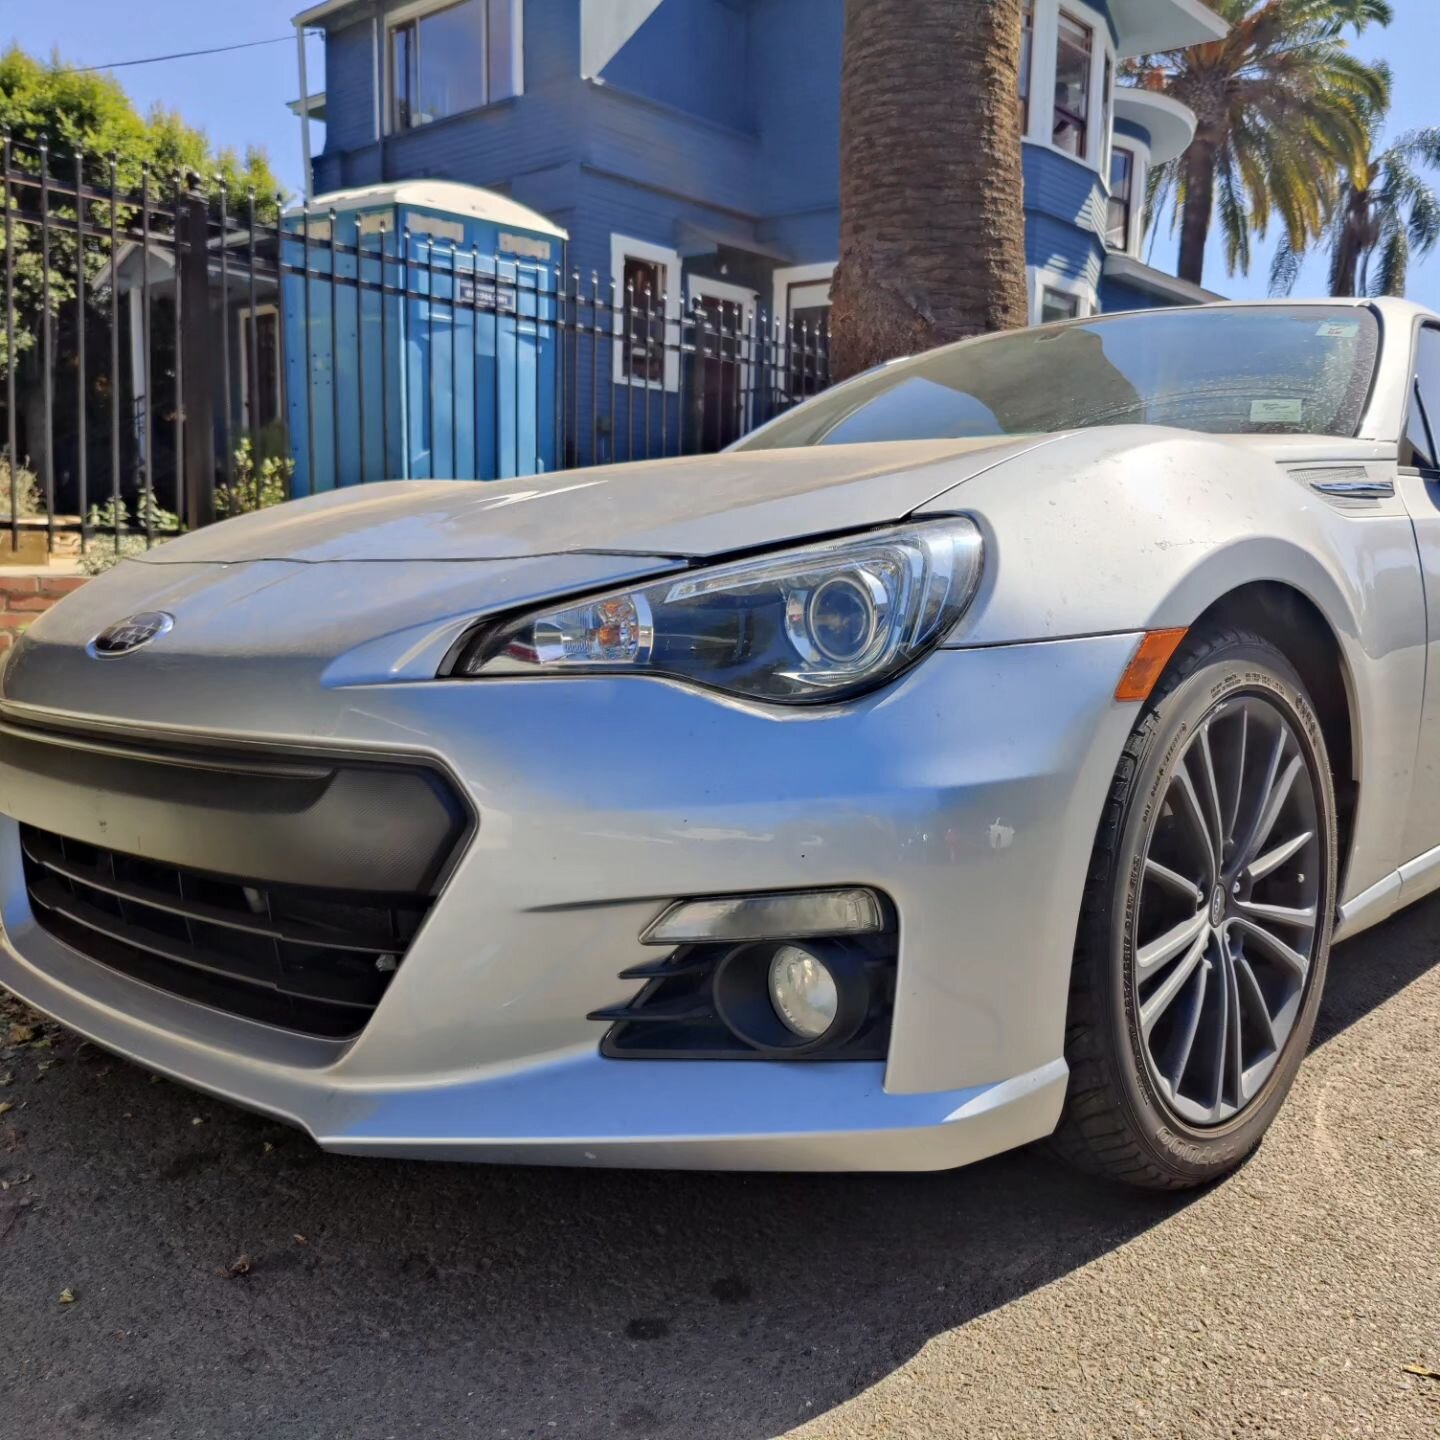 An Interior detail &amp; Carwash done on a BRZ. Make your vehicle car meet ready when you get it done by Geo's Mobile Auto Detailing. 
.
.
.
.
.
.
.
.
.
#brz #subaru #detailing #interiordetail #carwash #dirty #clean #beforeandafter #explore #localbus